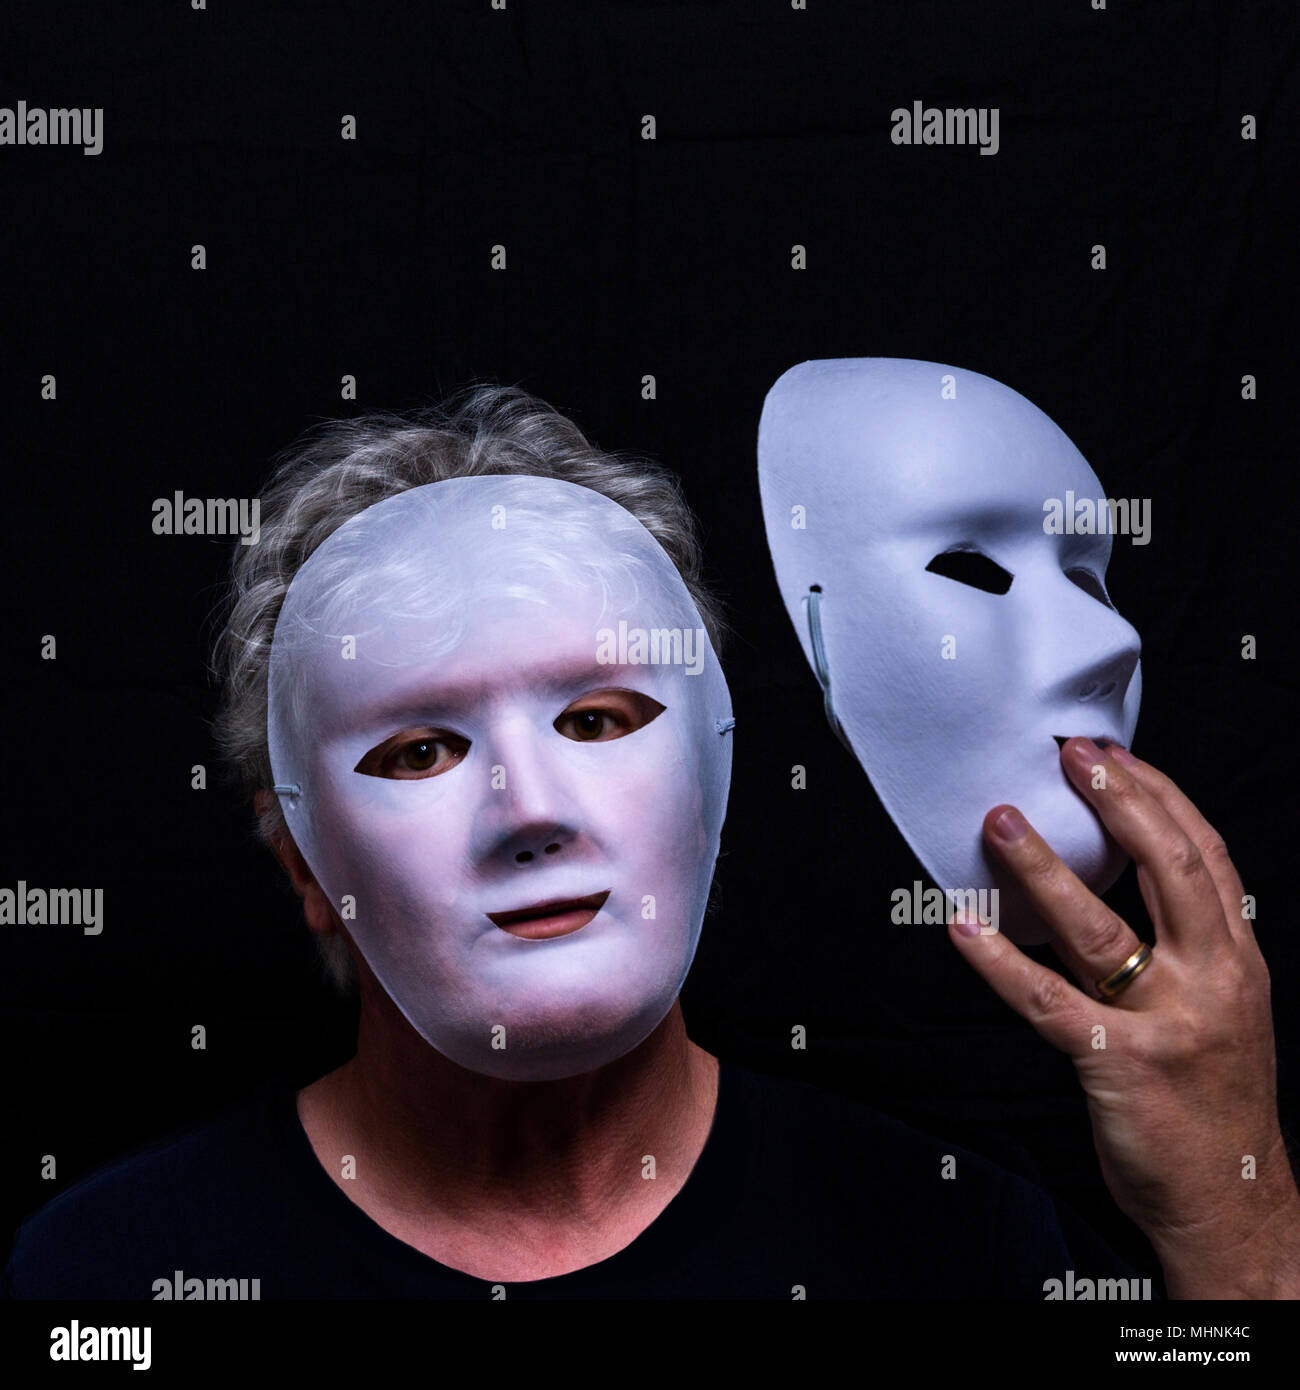 https://c8.alamy.com/comp/MHNK4C/masked-man-double-exposure-with-mask-in-hand-and-facial-features-partly-appearing-through-mask-on-face-MHNK4C.jpg